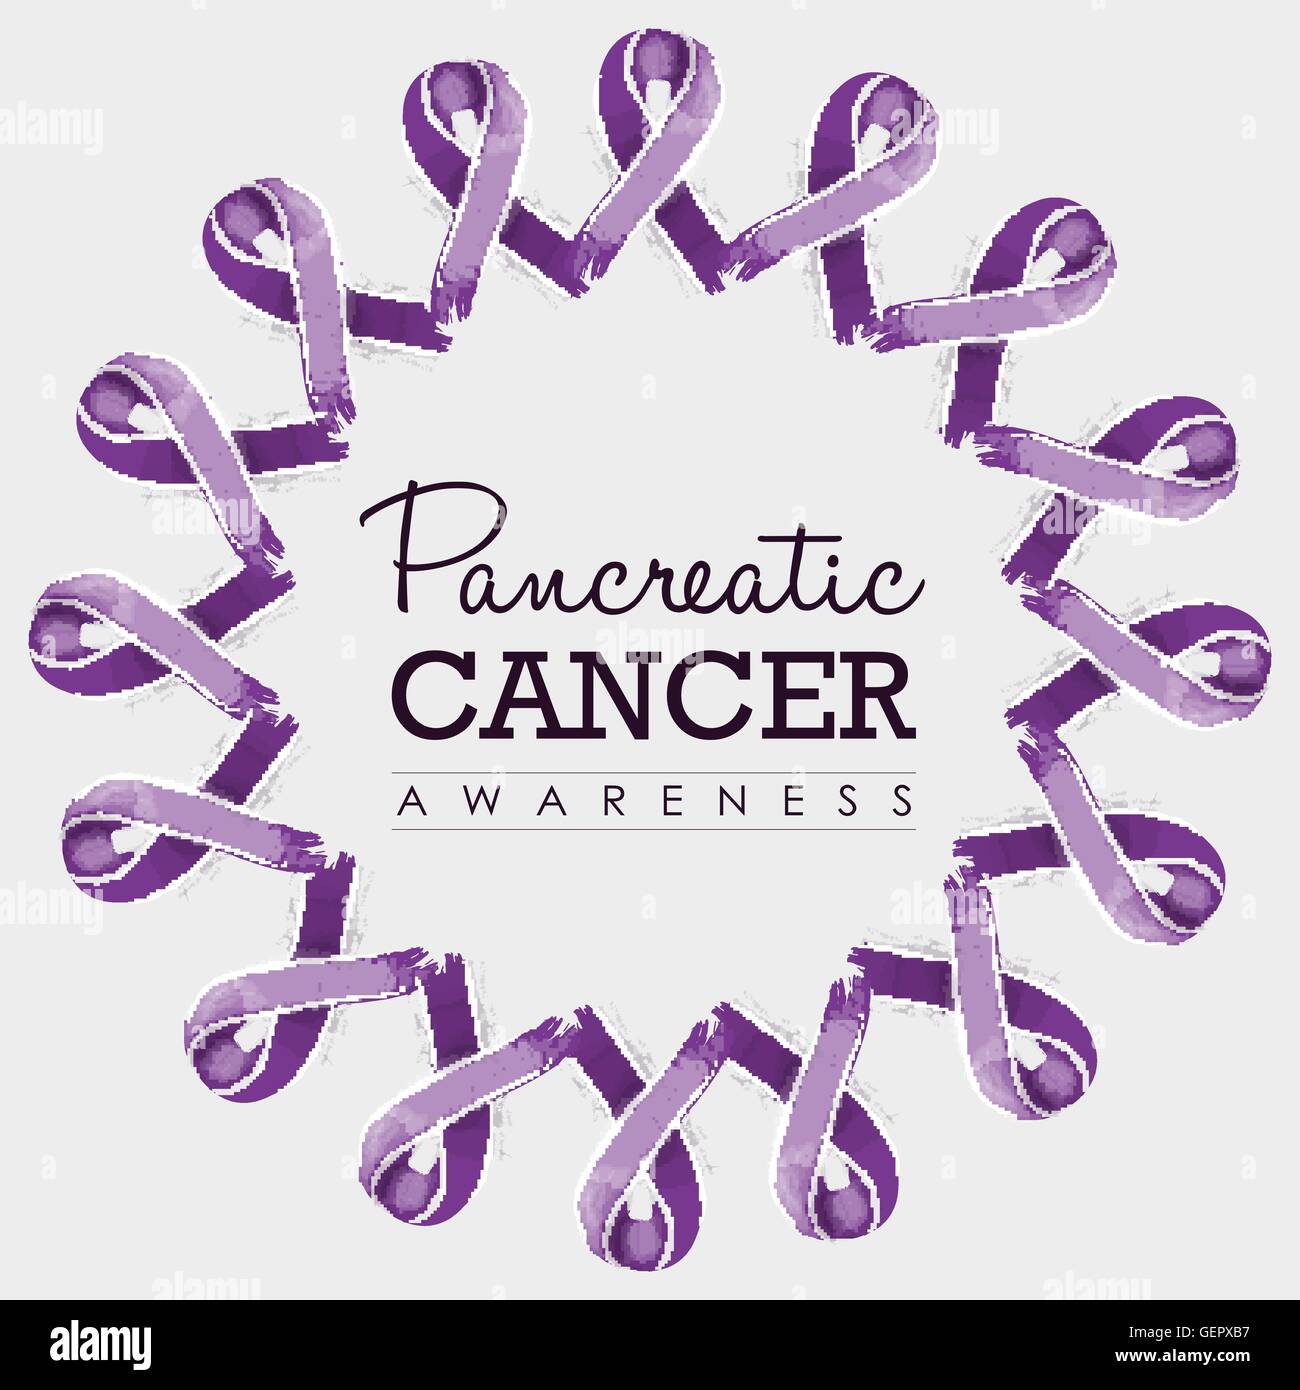 Pancreatic cancer awareness typography design with mandala made of purple hand drawn ribbons. EPS10 vector. Stock Vector